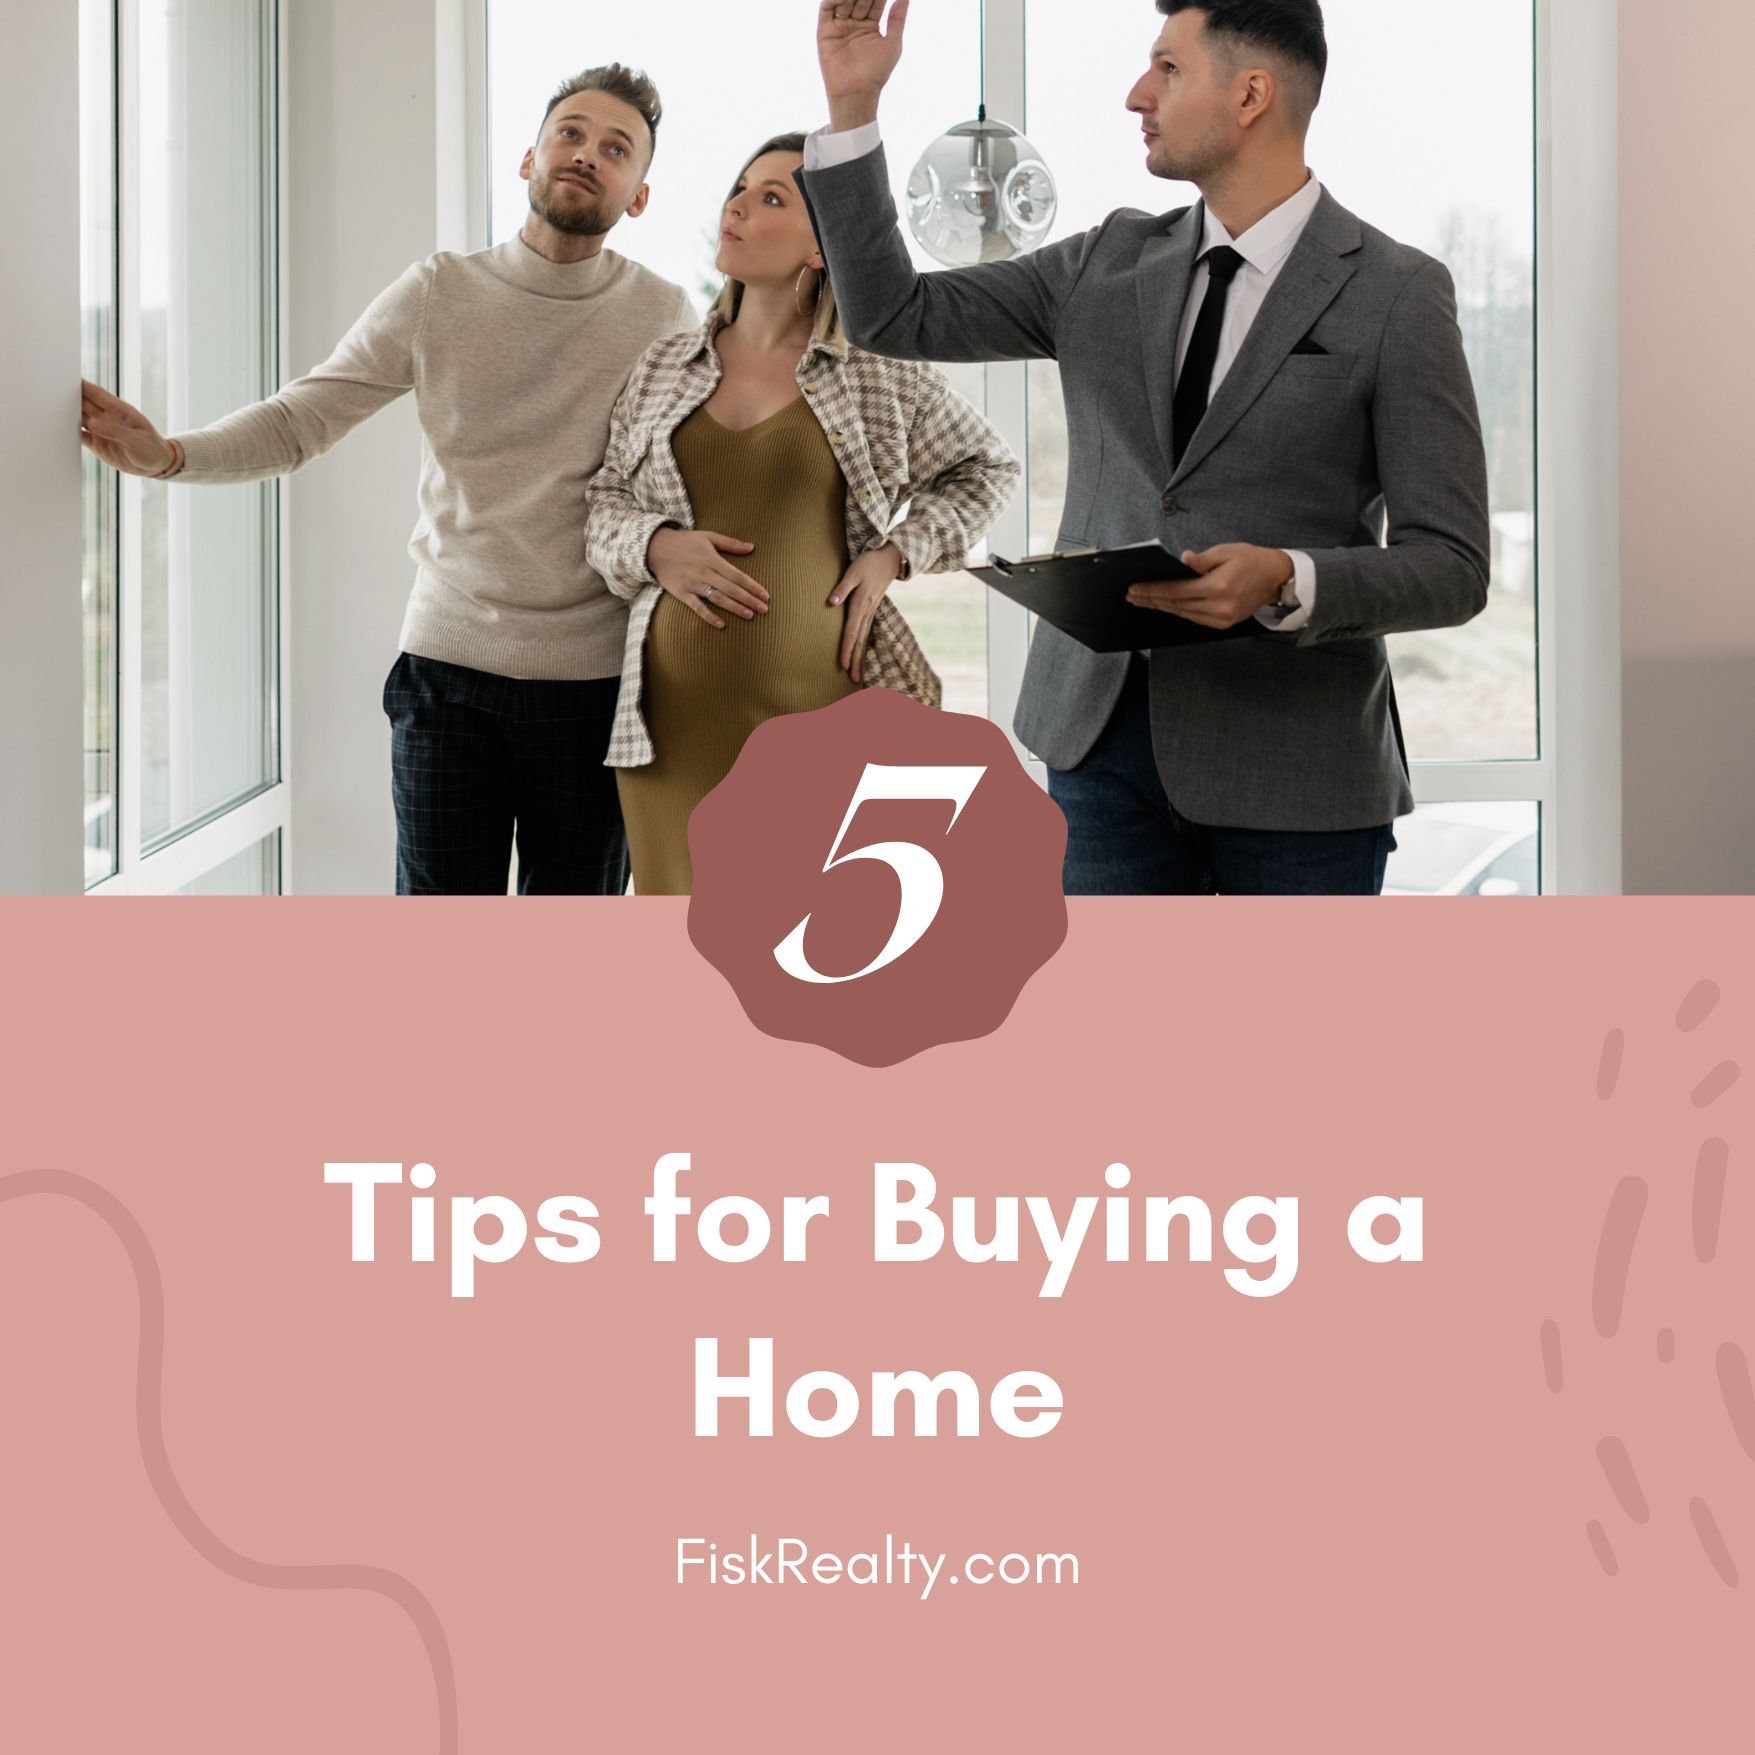 Top Tips for Buying a Home